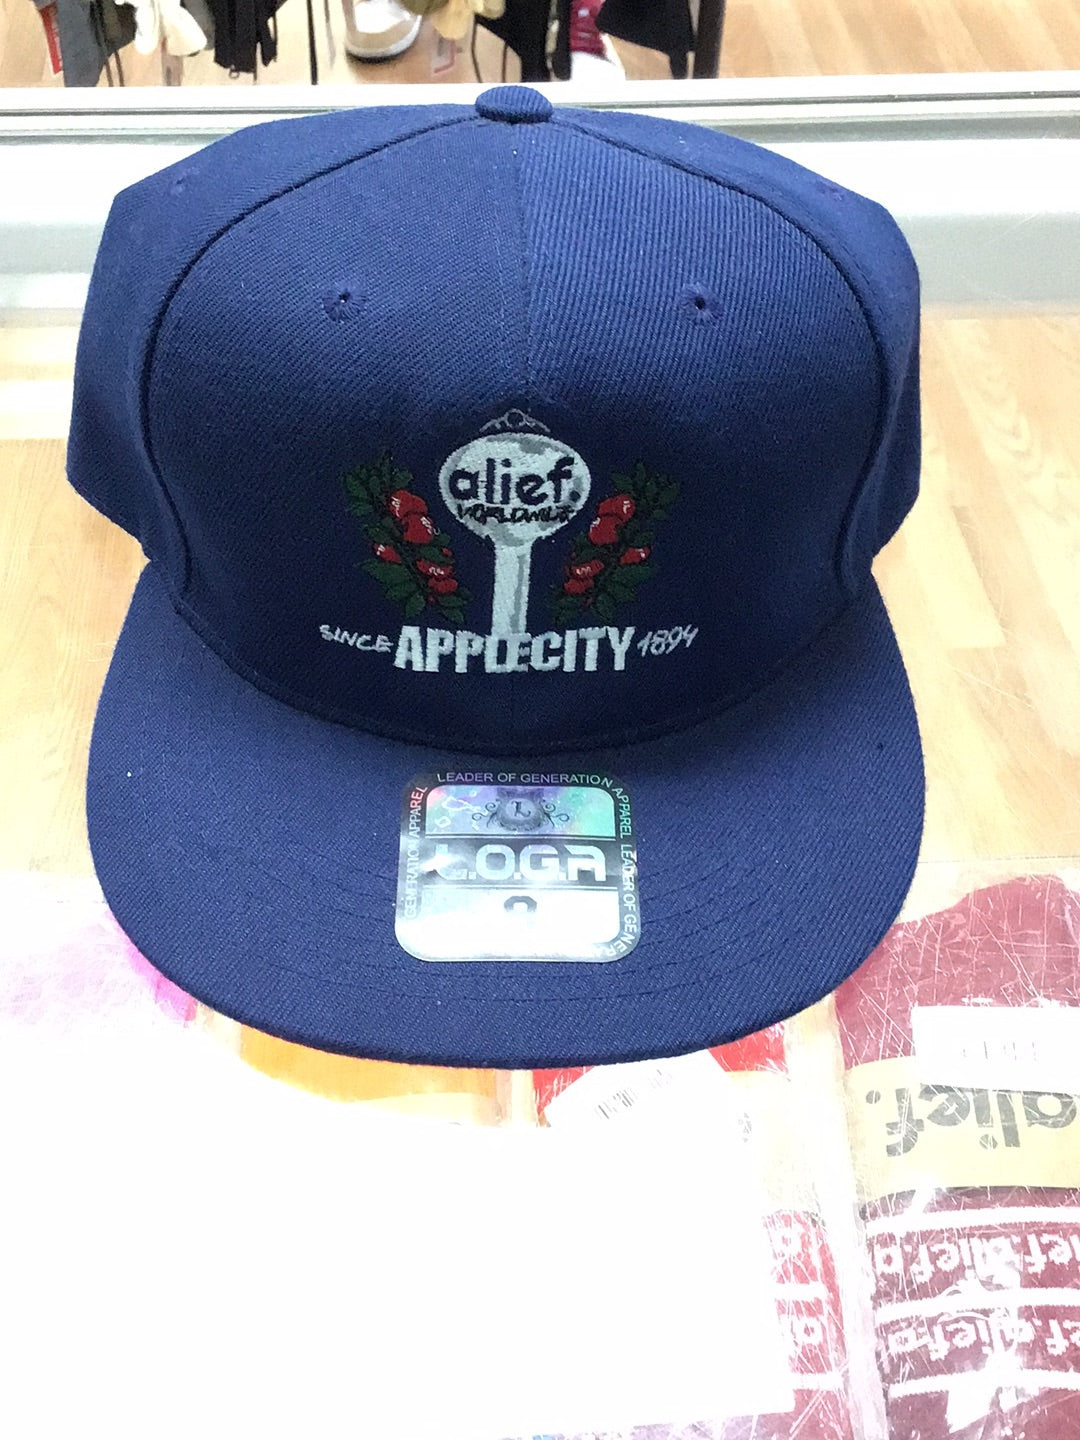 Applecity since 1894 (fitted) hat